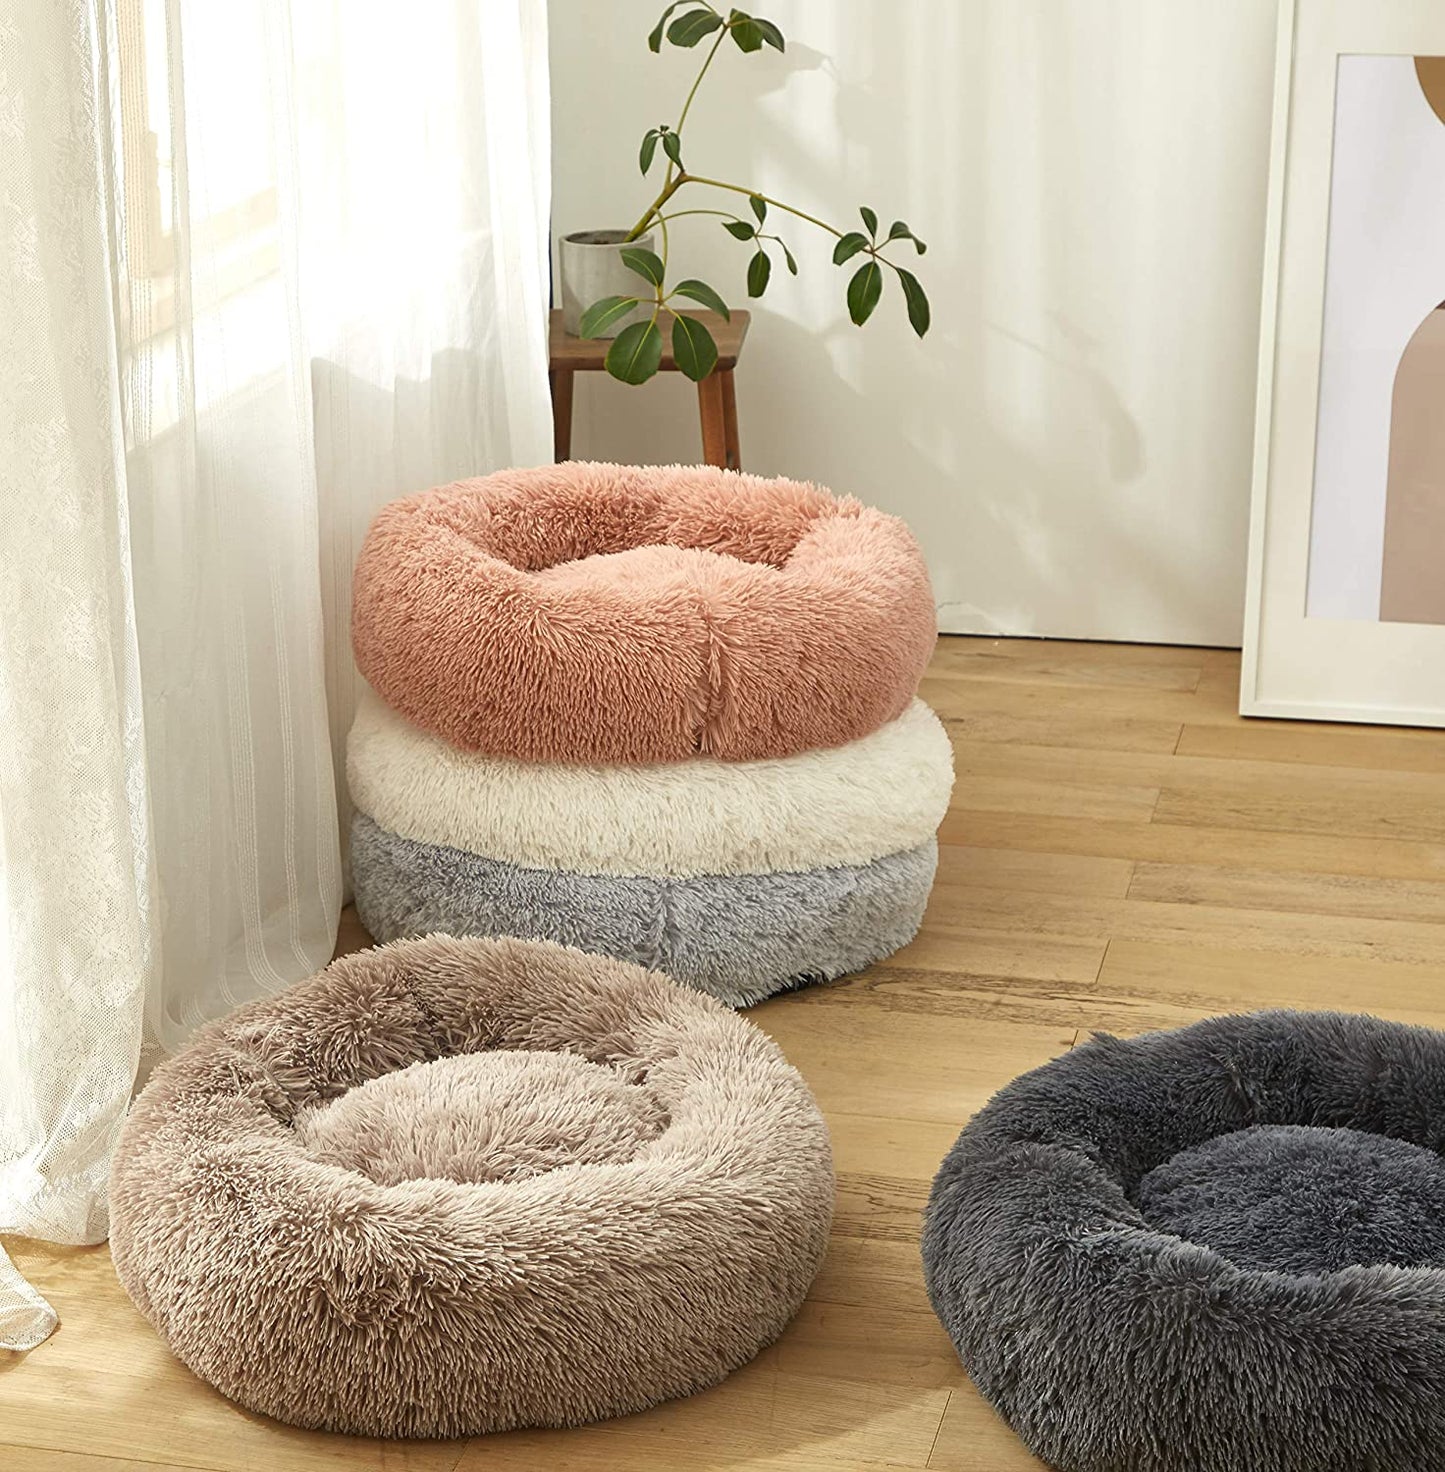 Plush Faux Fur round Pet Dog Bed, Comfortable Fuzzy Donut Cuddler Cushion for Dogs & Cats, Soft Shaggy and Warm for Winter (Pink, 23.6")